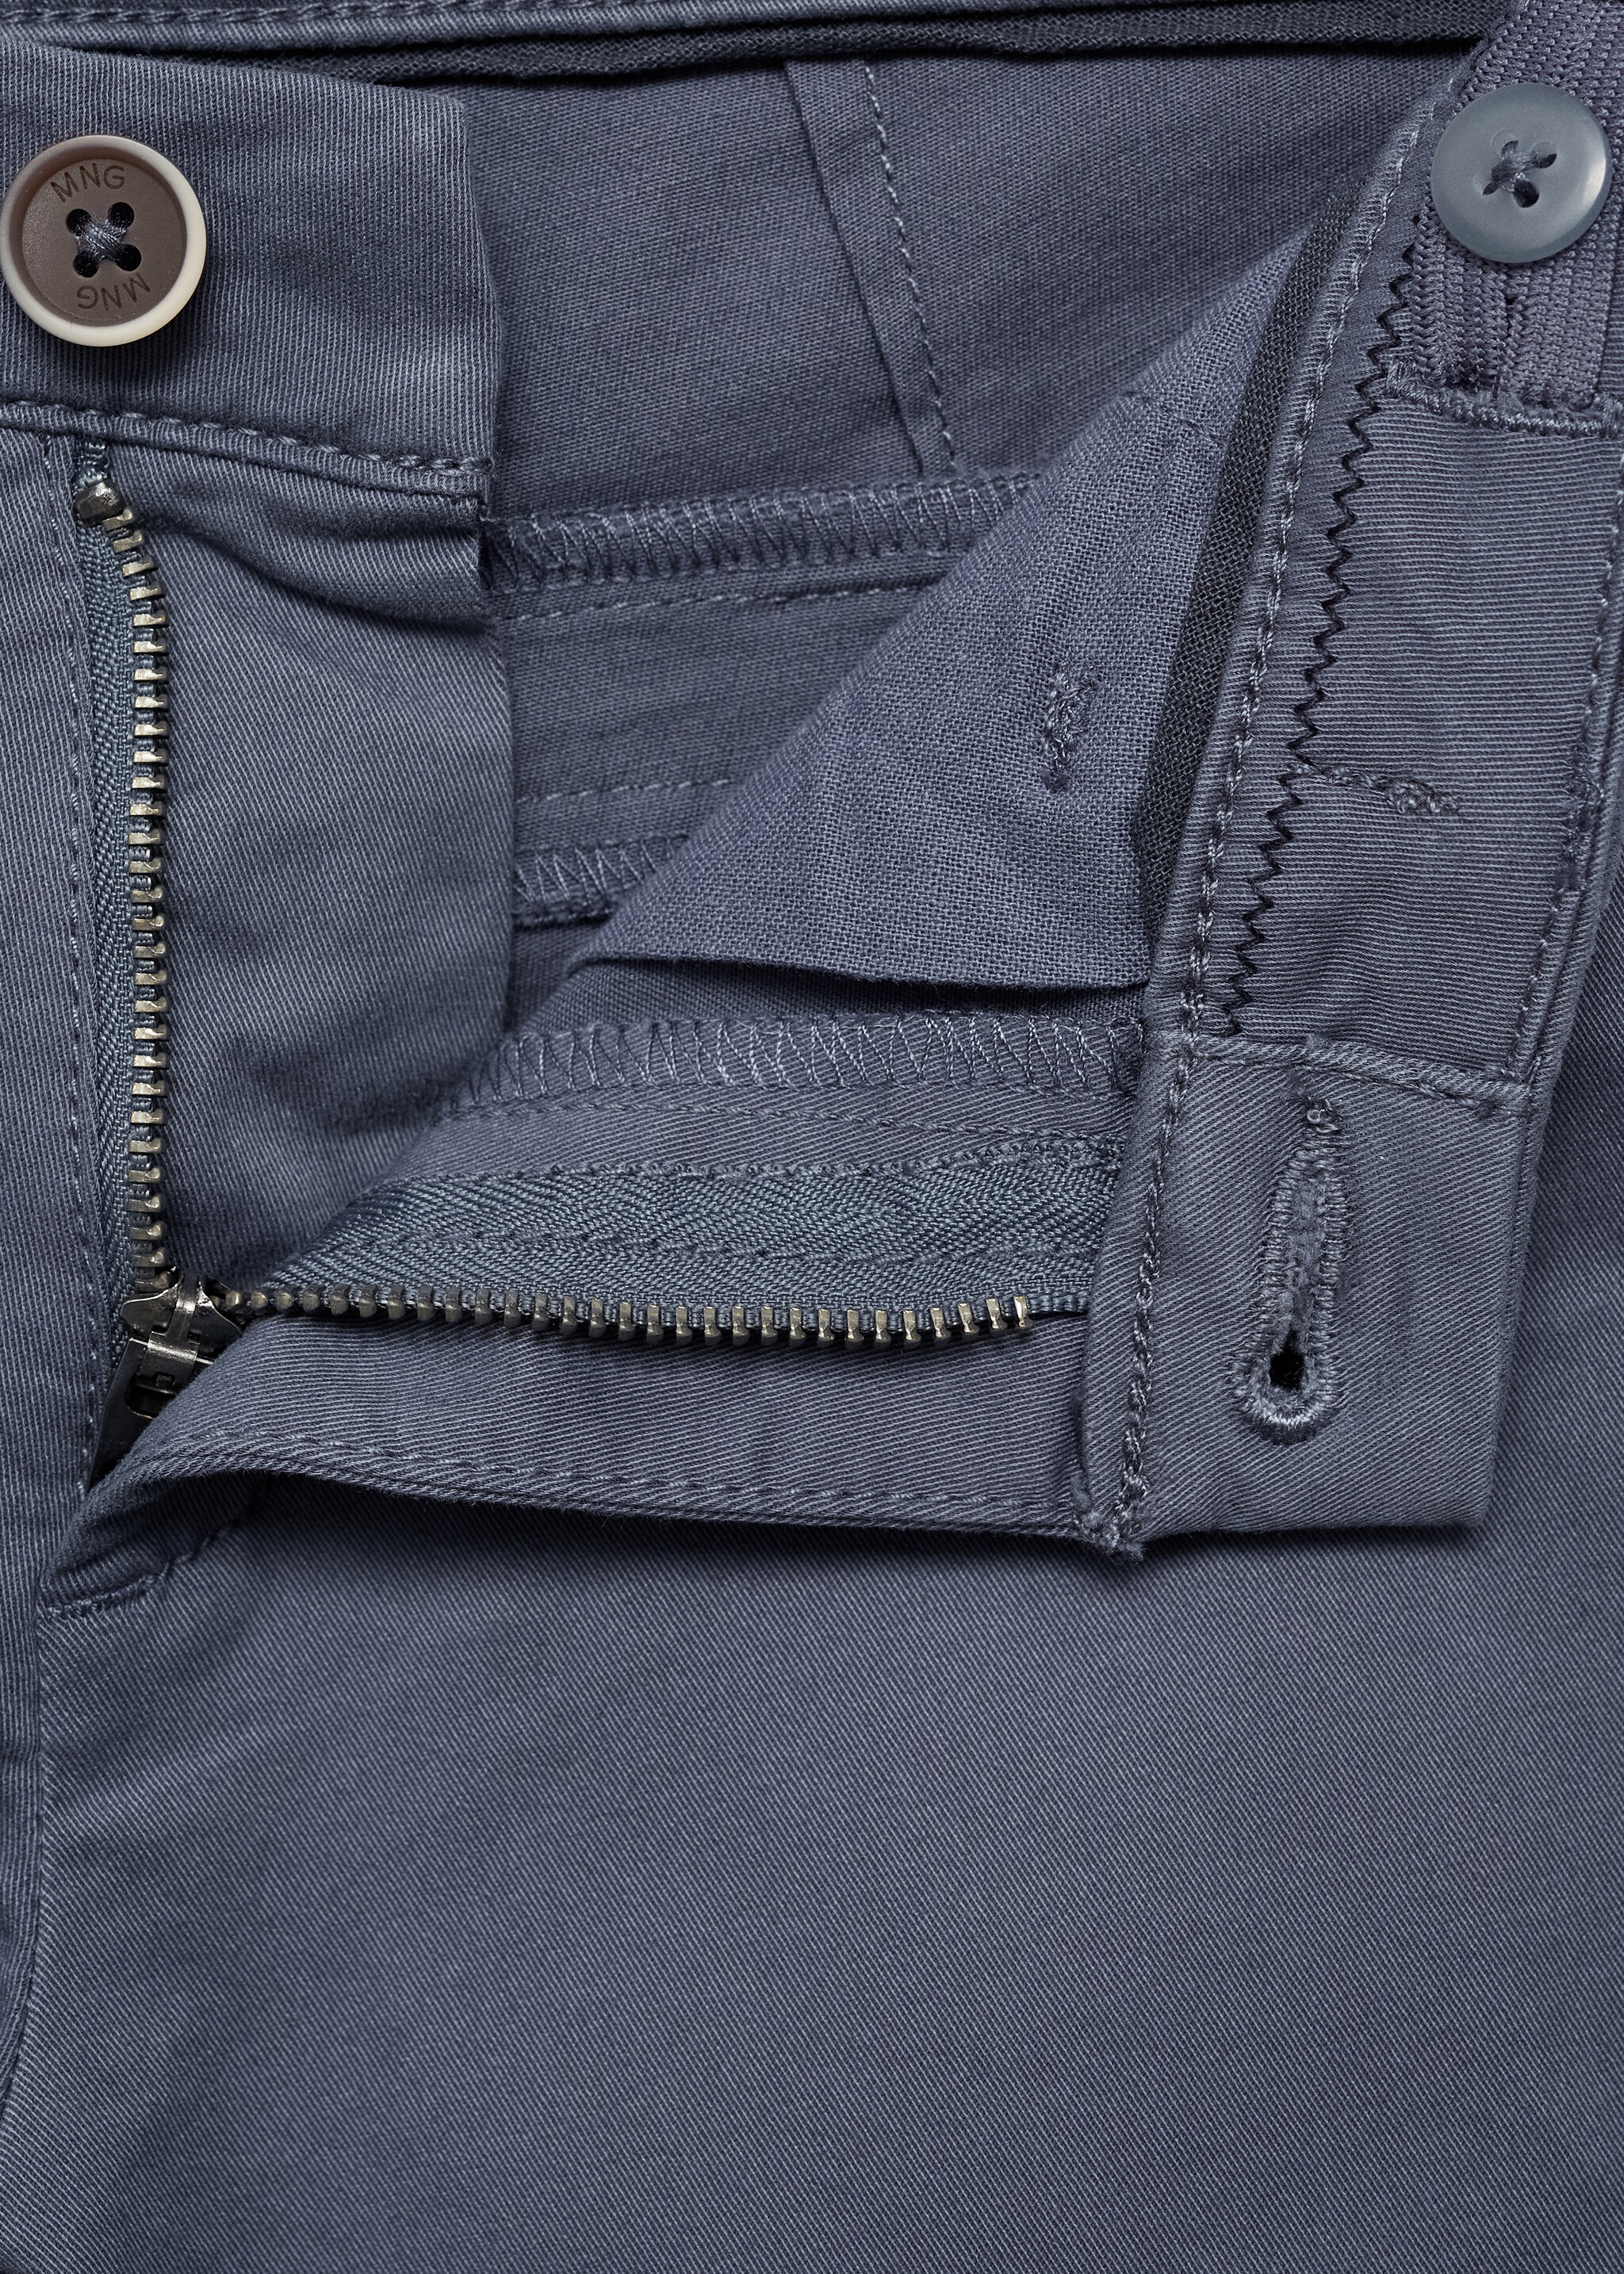 Cotton chinos - Details of the article 0